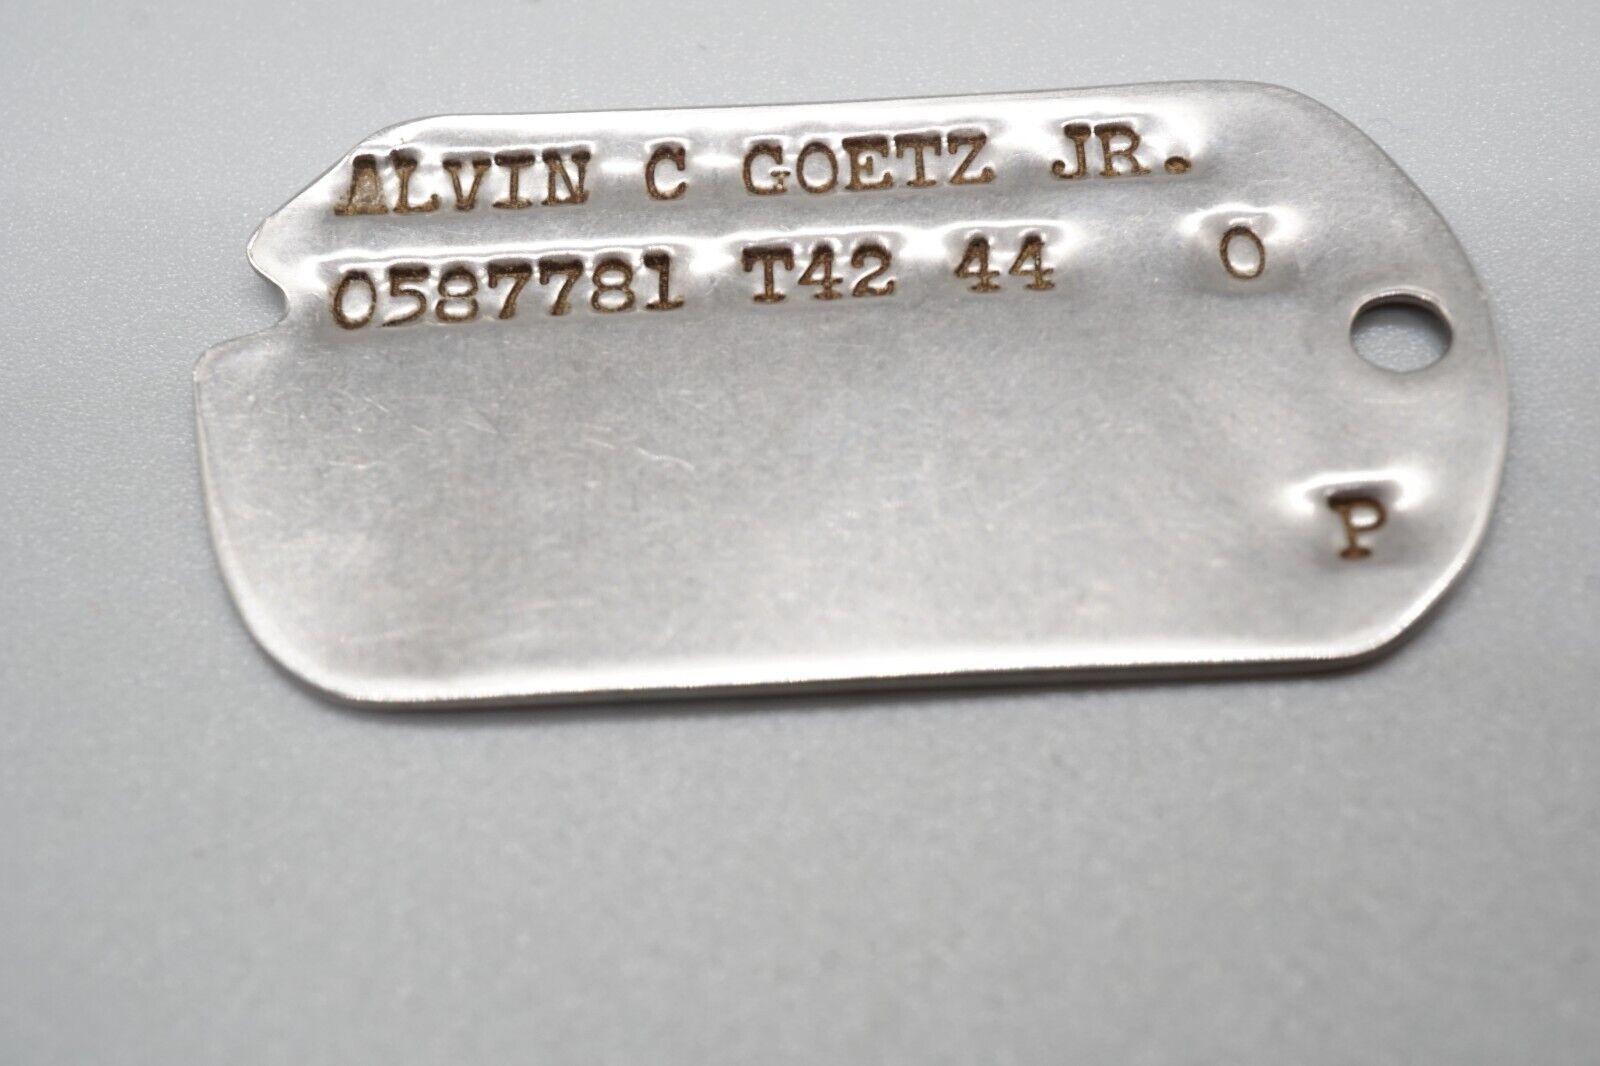 WWII 1942 & 1944 Army Officer Dog Tag T42 44 - SUPER CLEAN MARKED LETTERS & #s